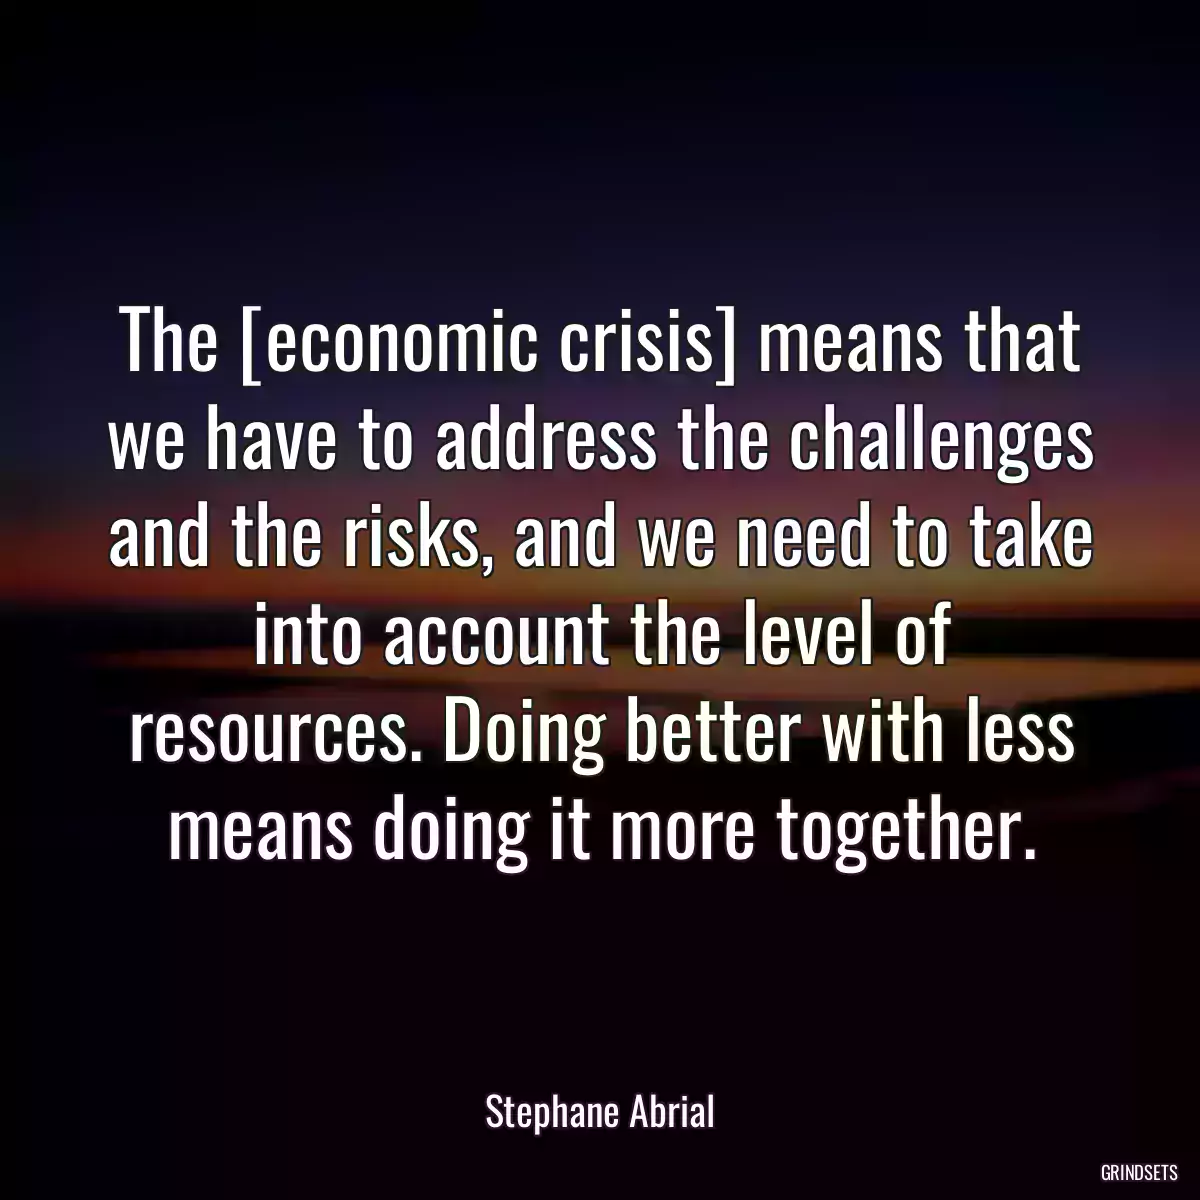 The [economic crisis] means that we have to address the challenges and the risks, and we need to take into account the level of resources. Doing better with less means doing it more together.